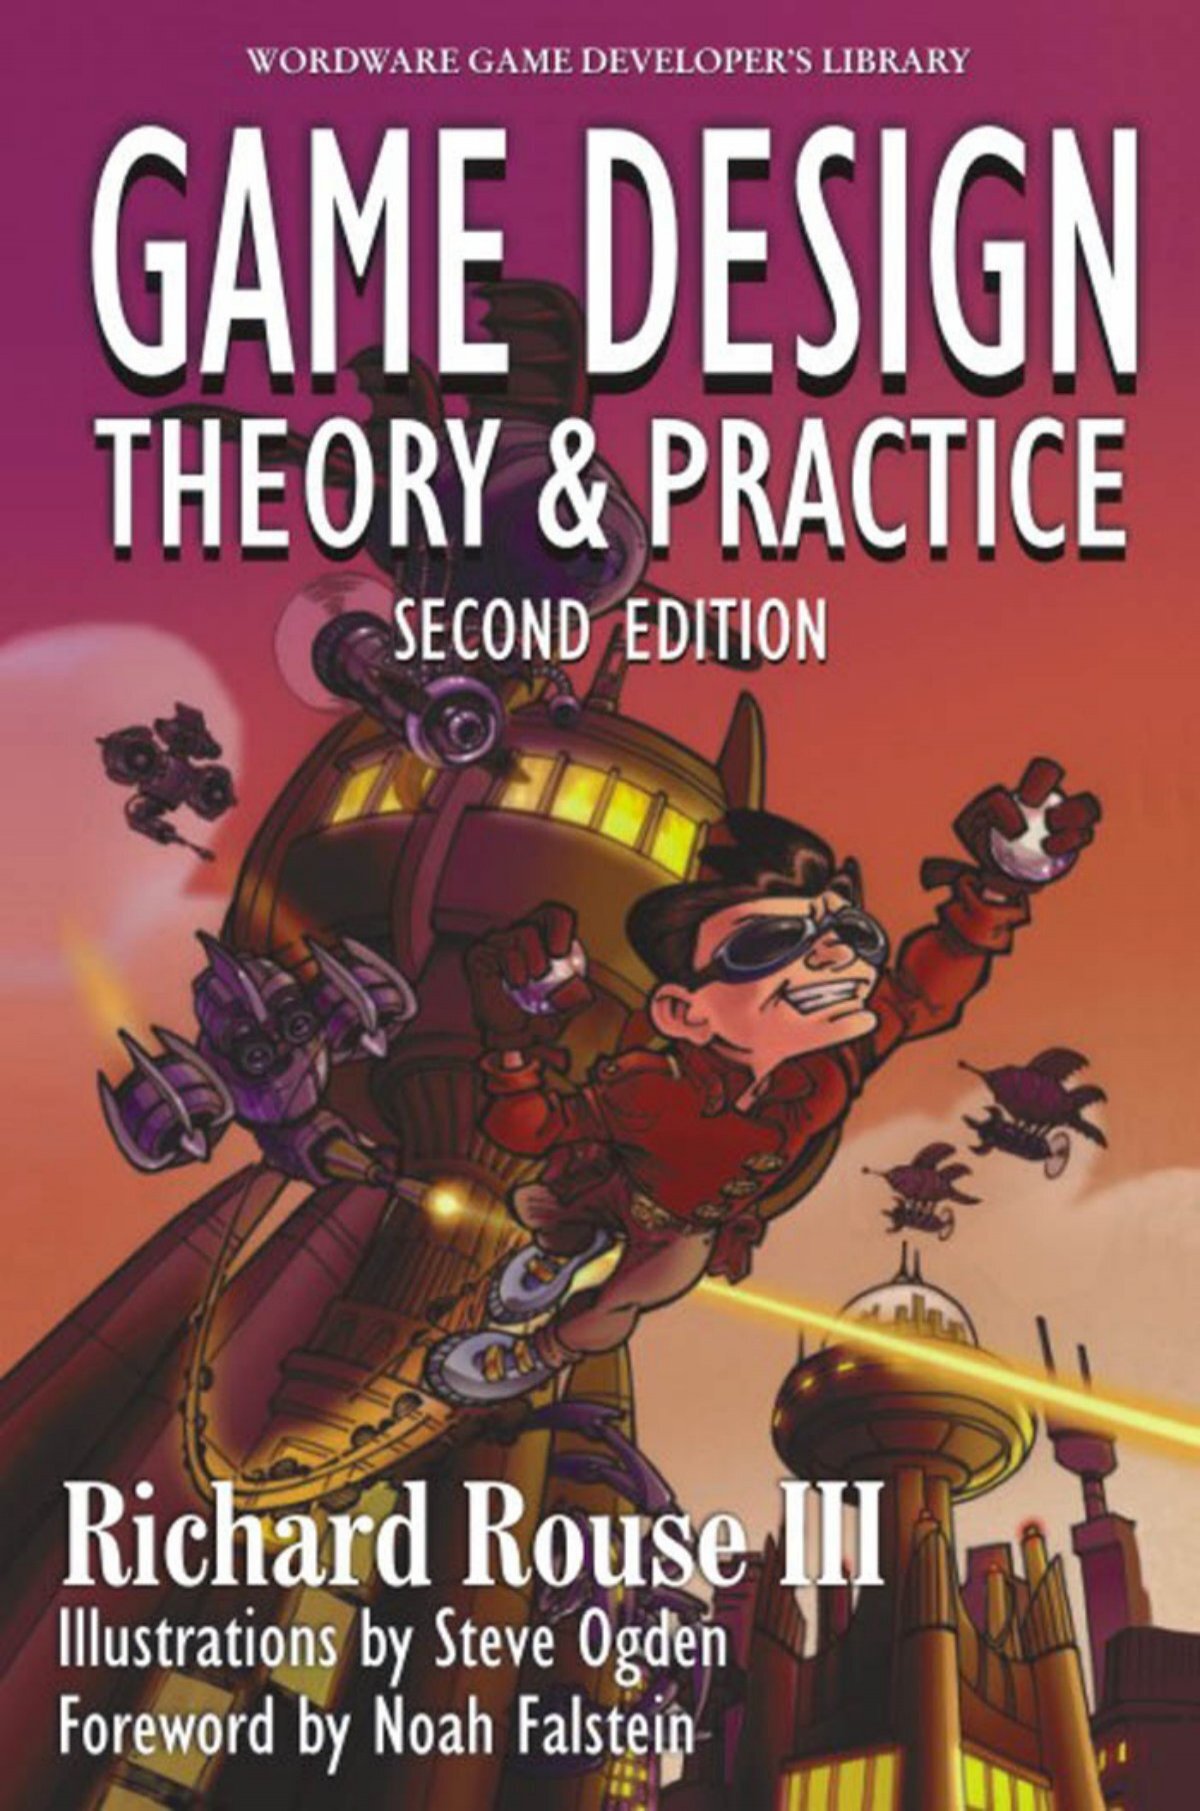 Game Design: Theory & Practice Second Edition